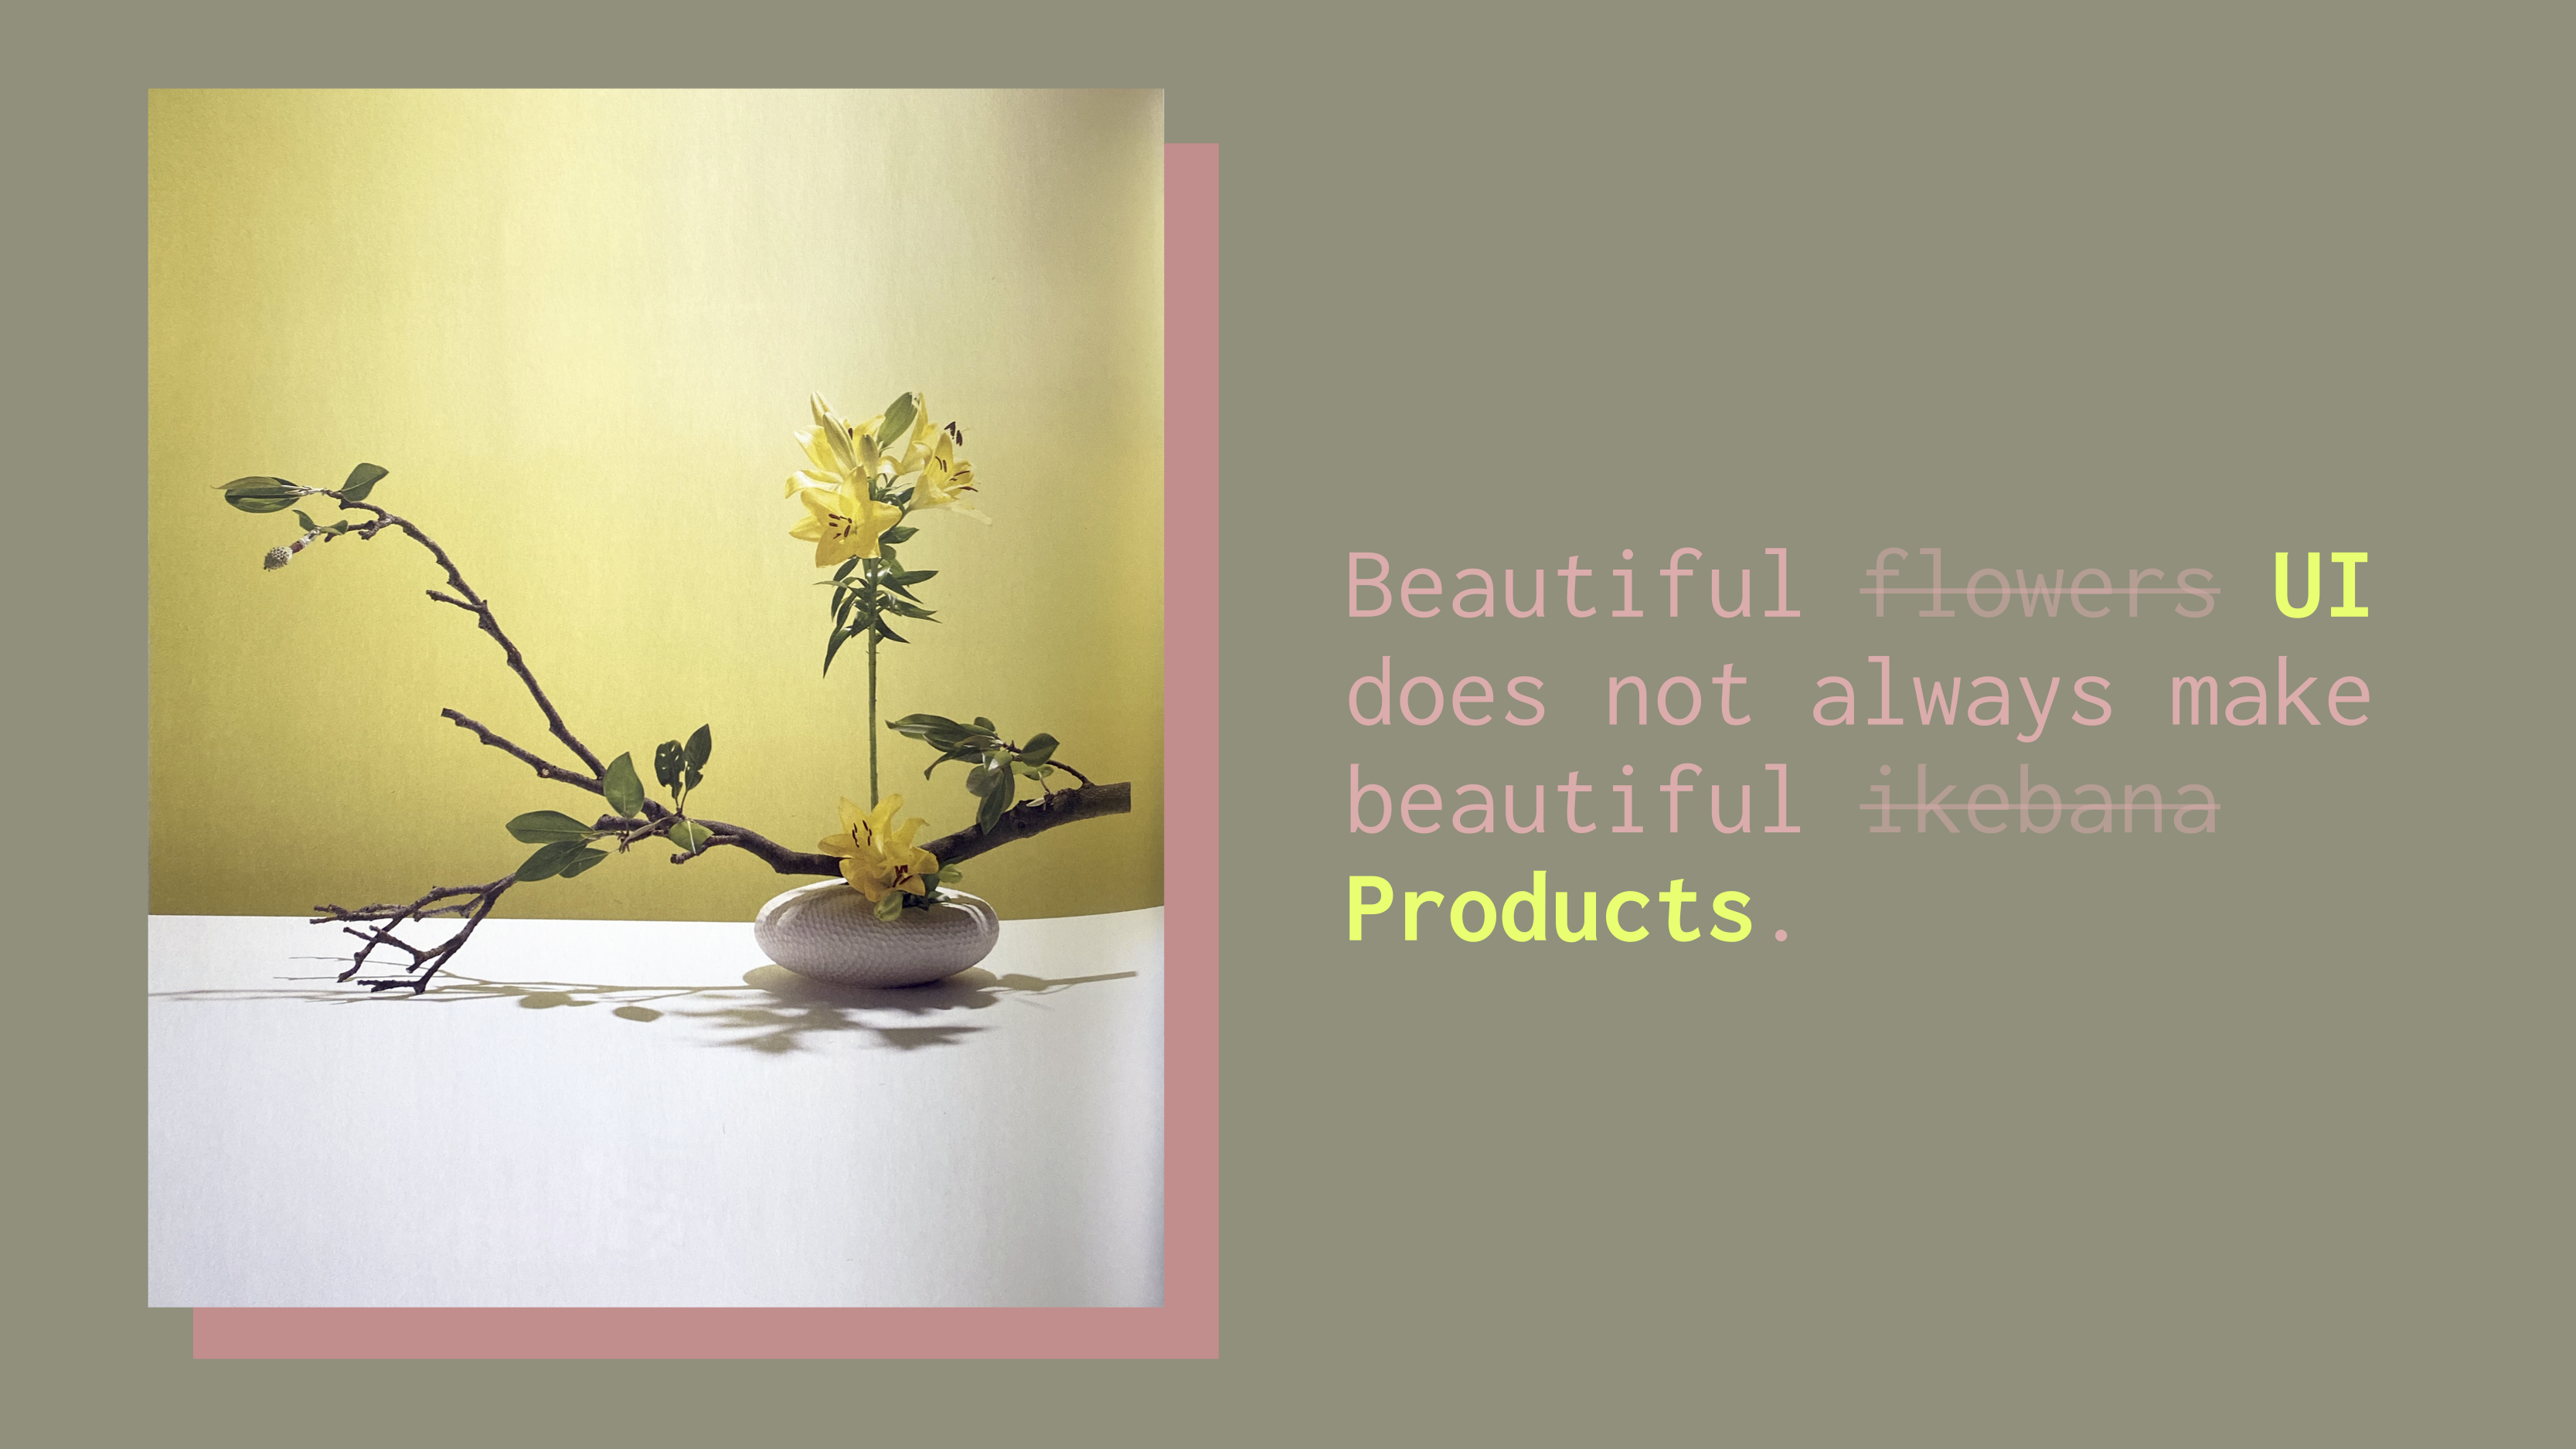 Ikebana arrangement next to text that reads, “Beautiful UI does not always make beautiful products.”